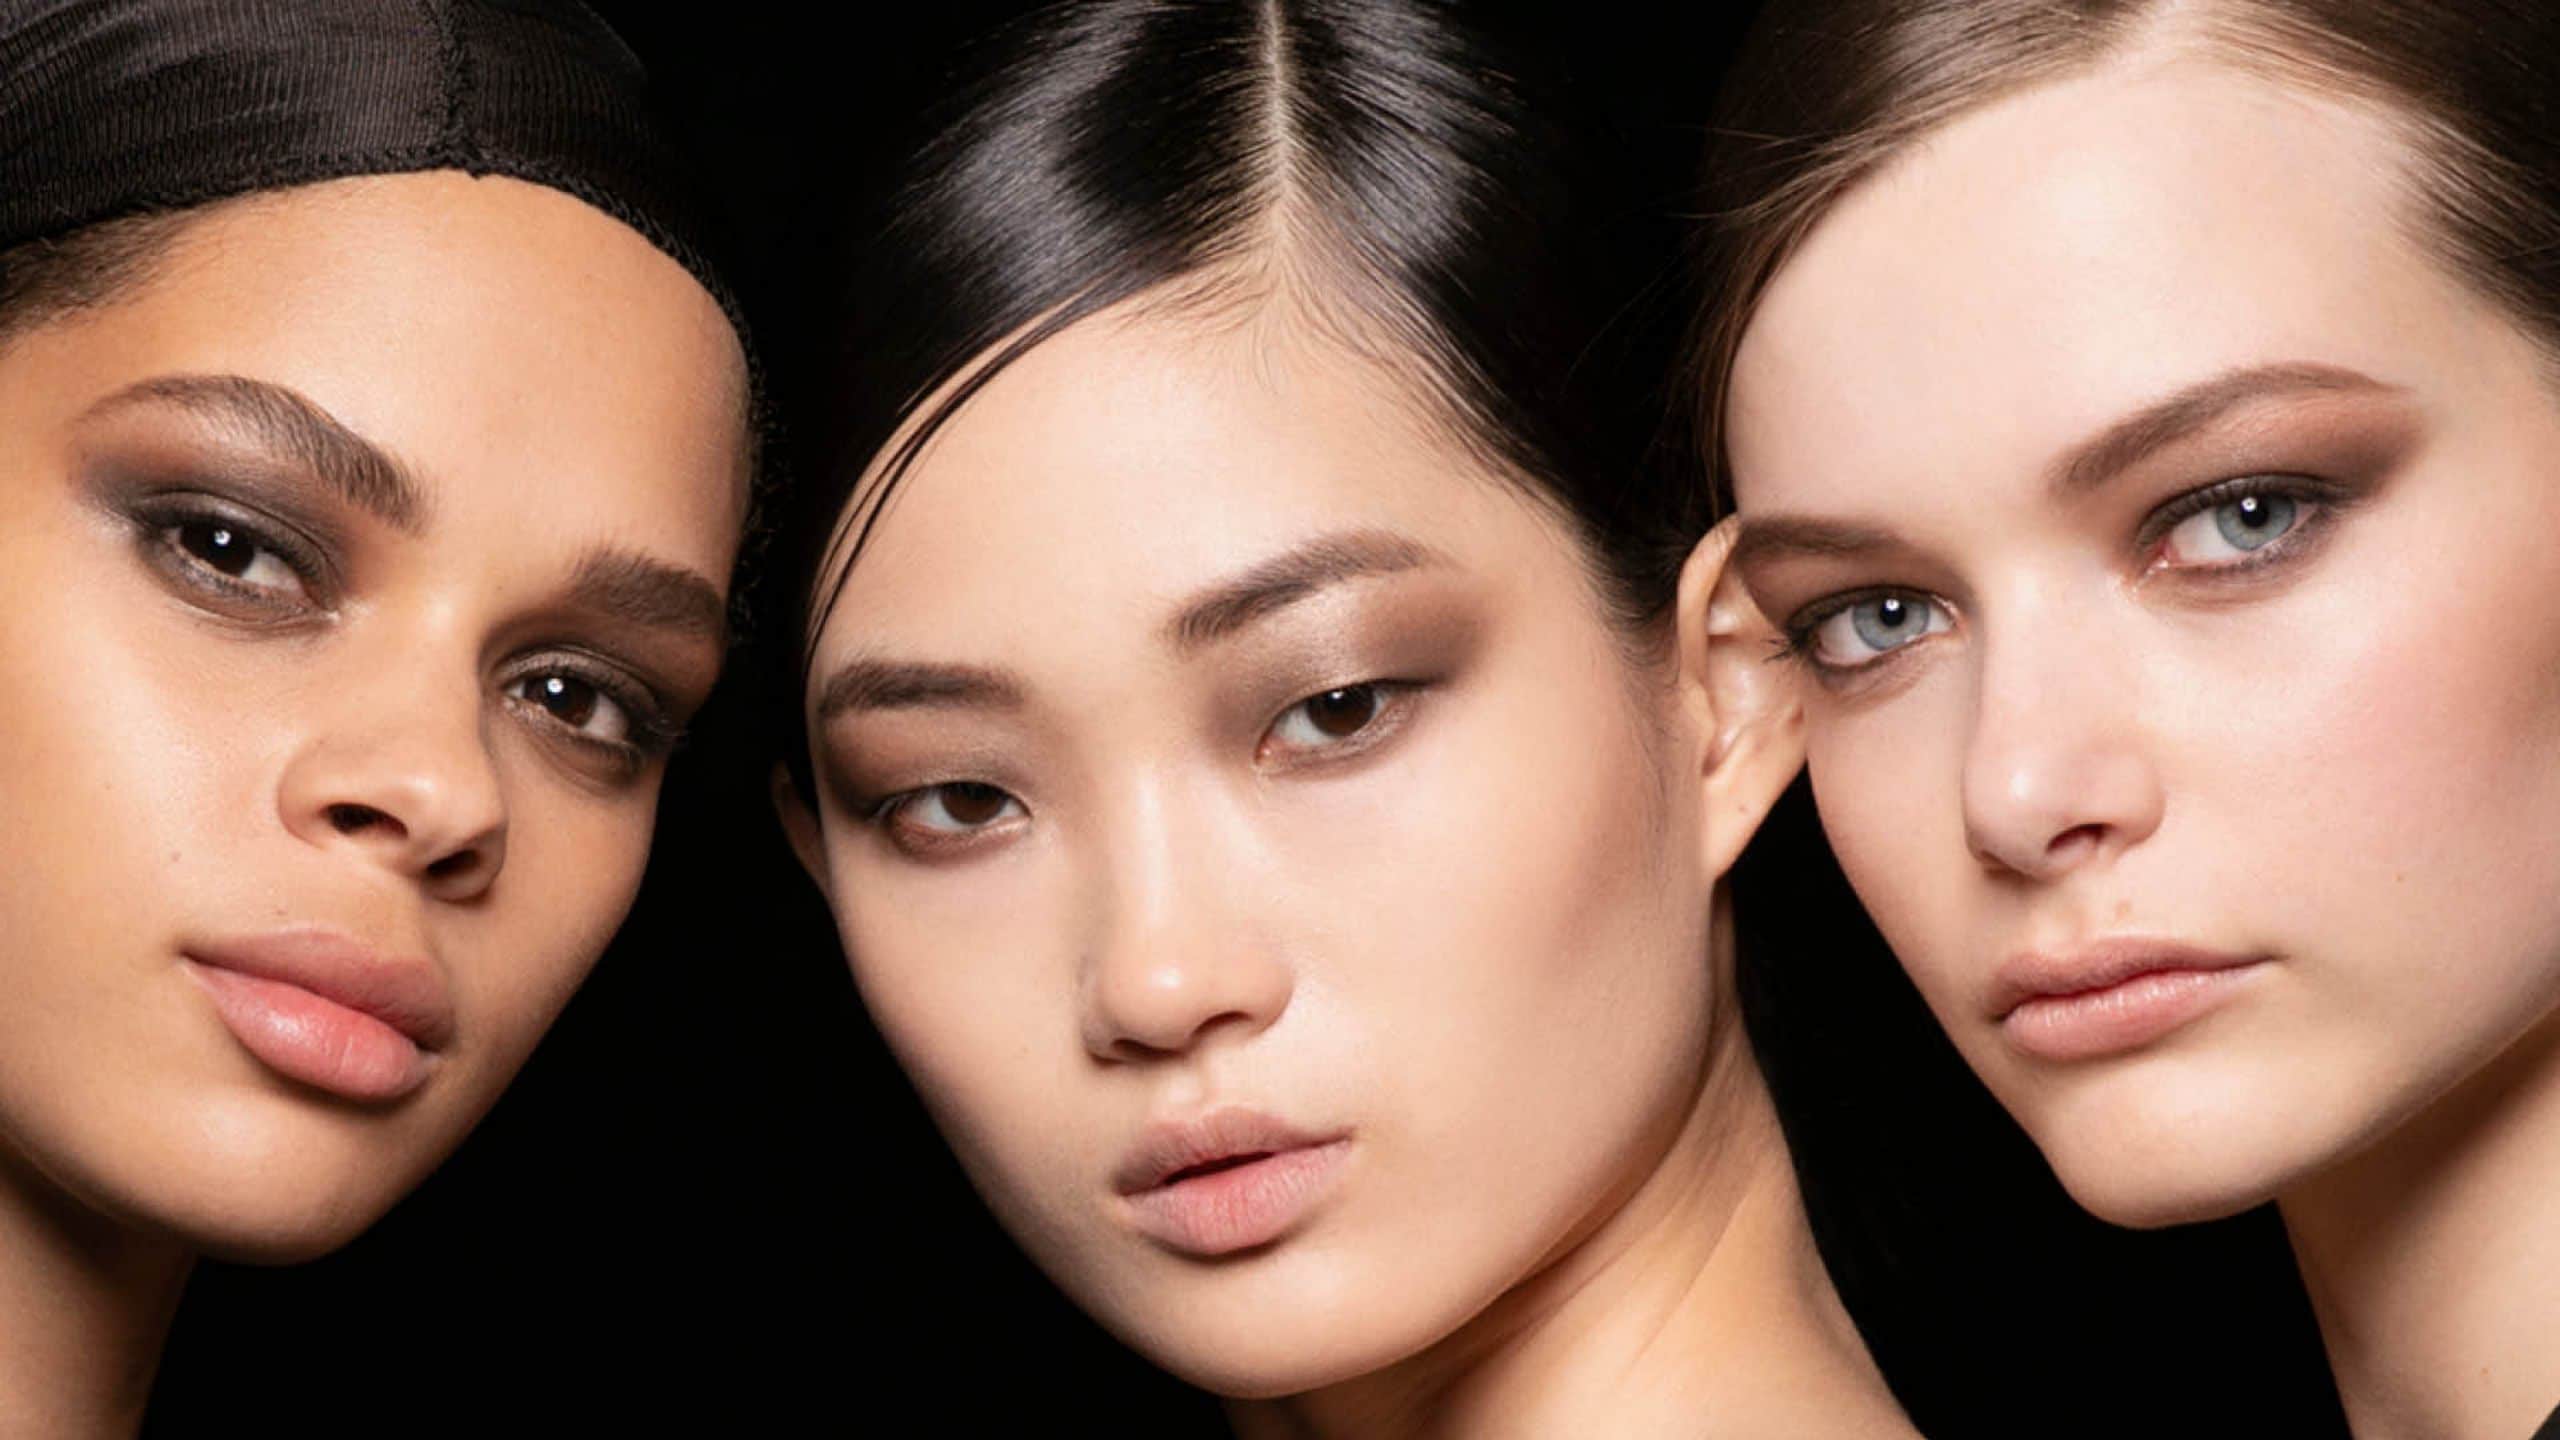 How to replicate subtle glam makeup from Tom AW19 runway